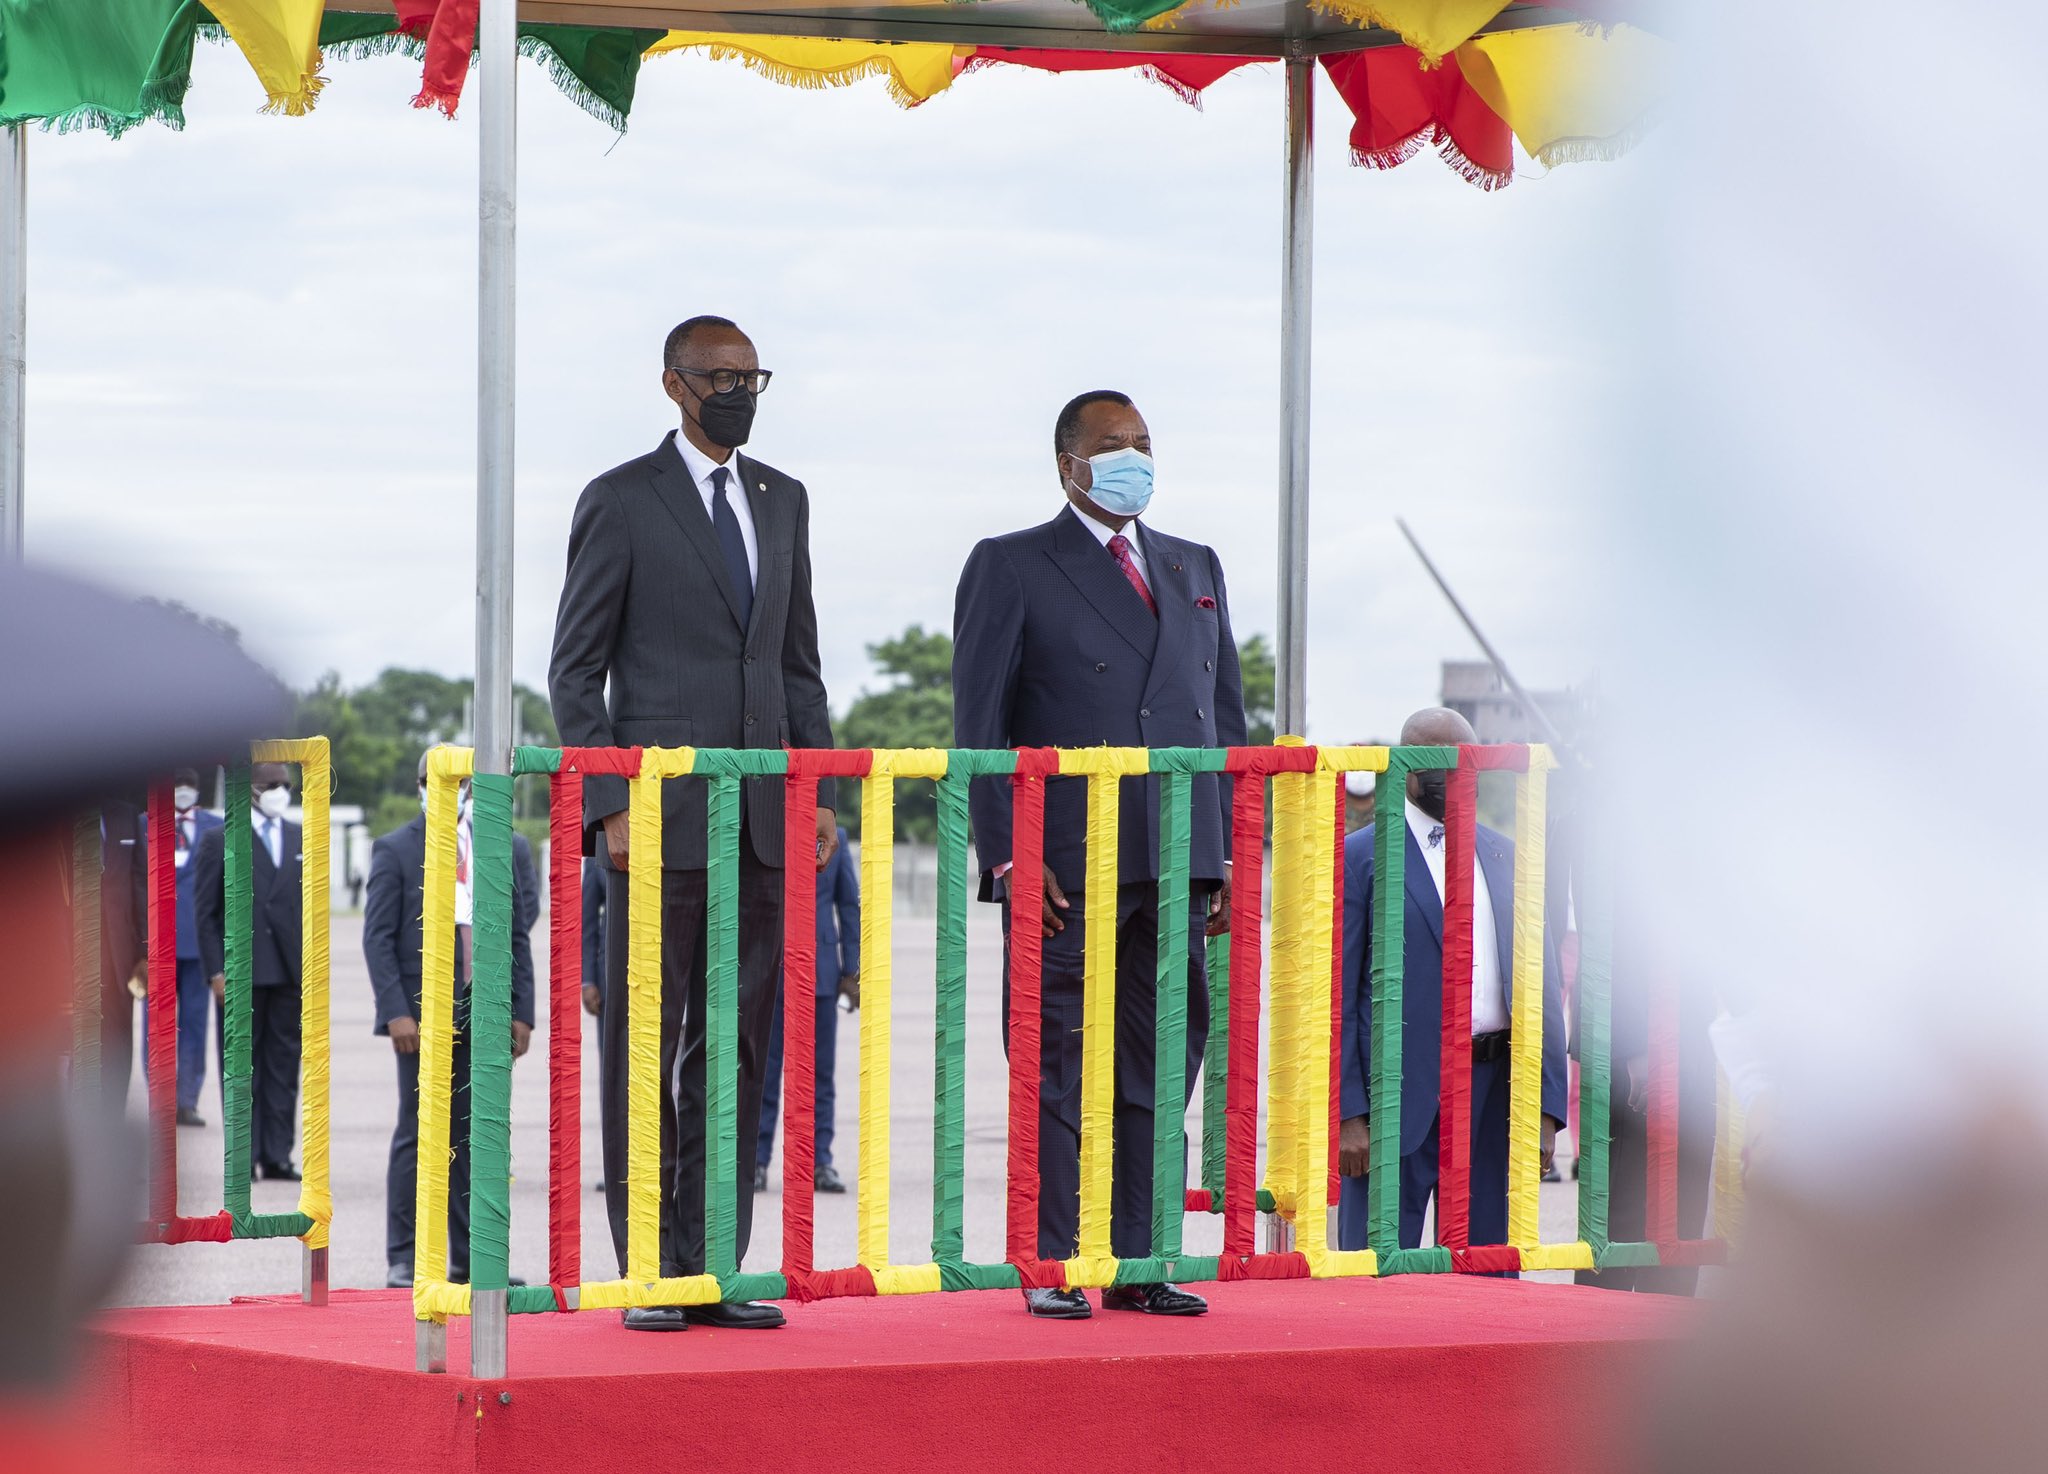 President Sassou Nguesso welcomes President Kagame to Brazzaville for a three day State Visit that will include a visit to Oyo. / Village Urugwiro